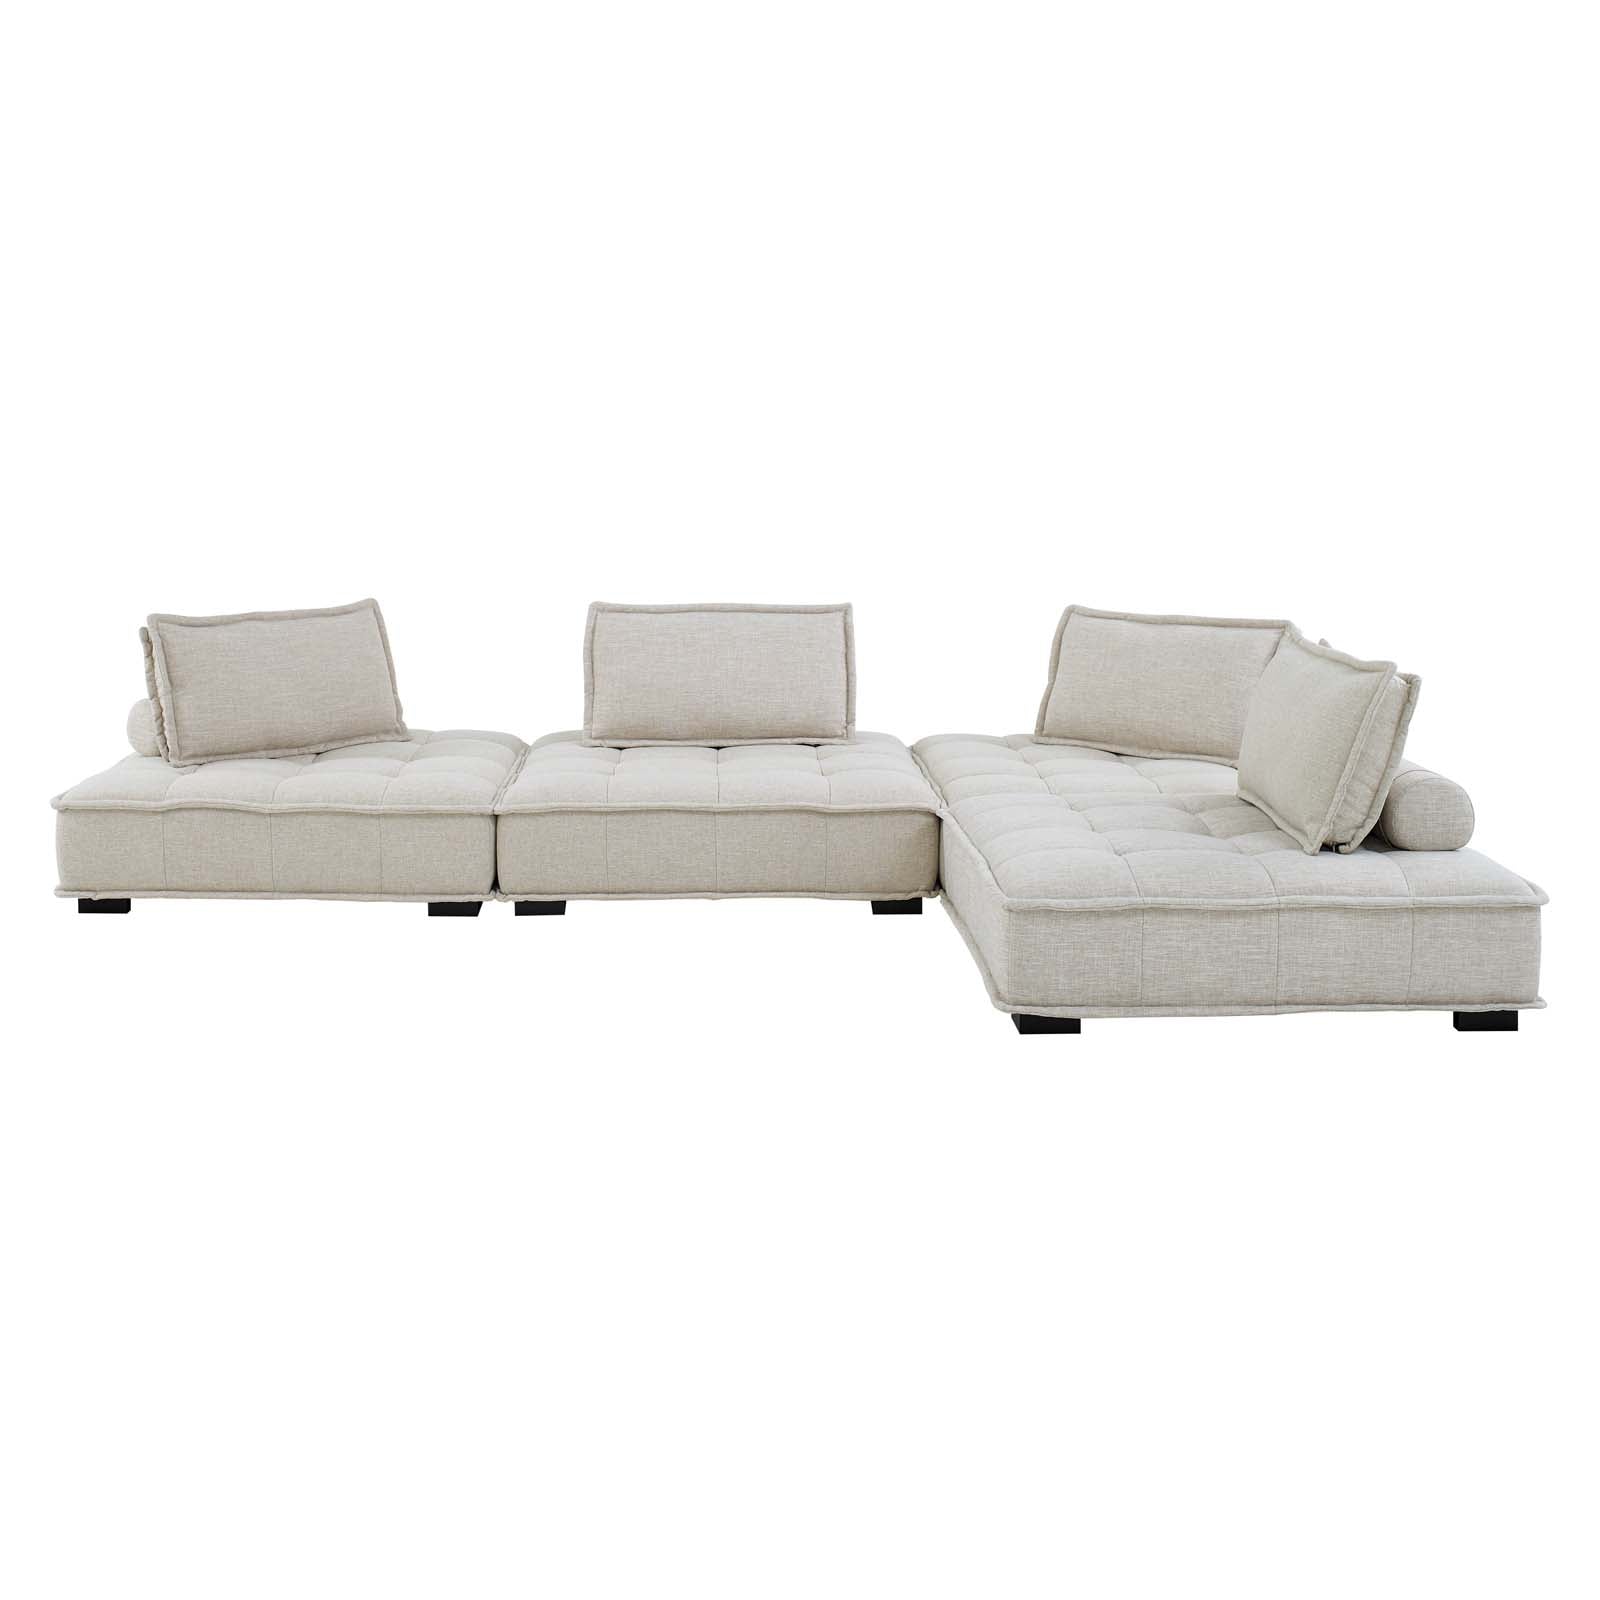 Modway Sectional Sofas - Saunter-Tufted-Fabric-Fabric-4-Piece-Sectional-Sofa-Beige